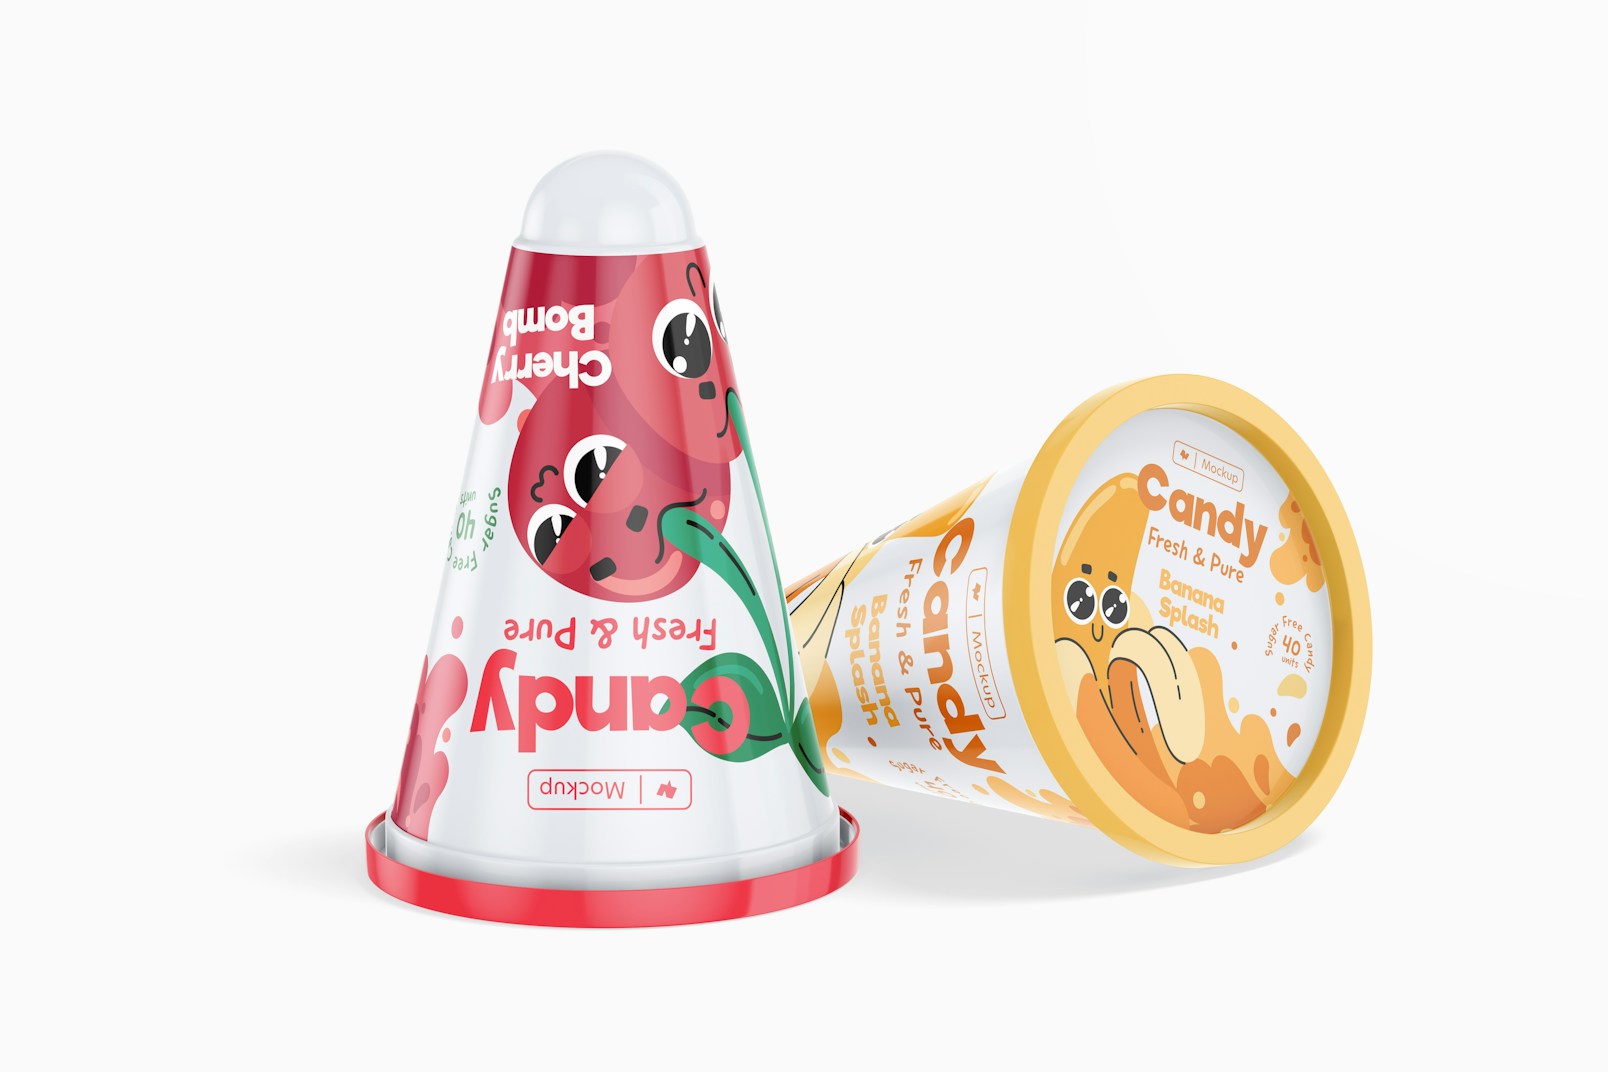 Pyramid Candy Packaging Mockup, Standing and Dropped